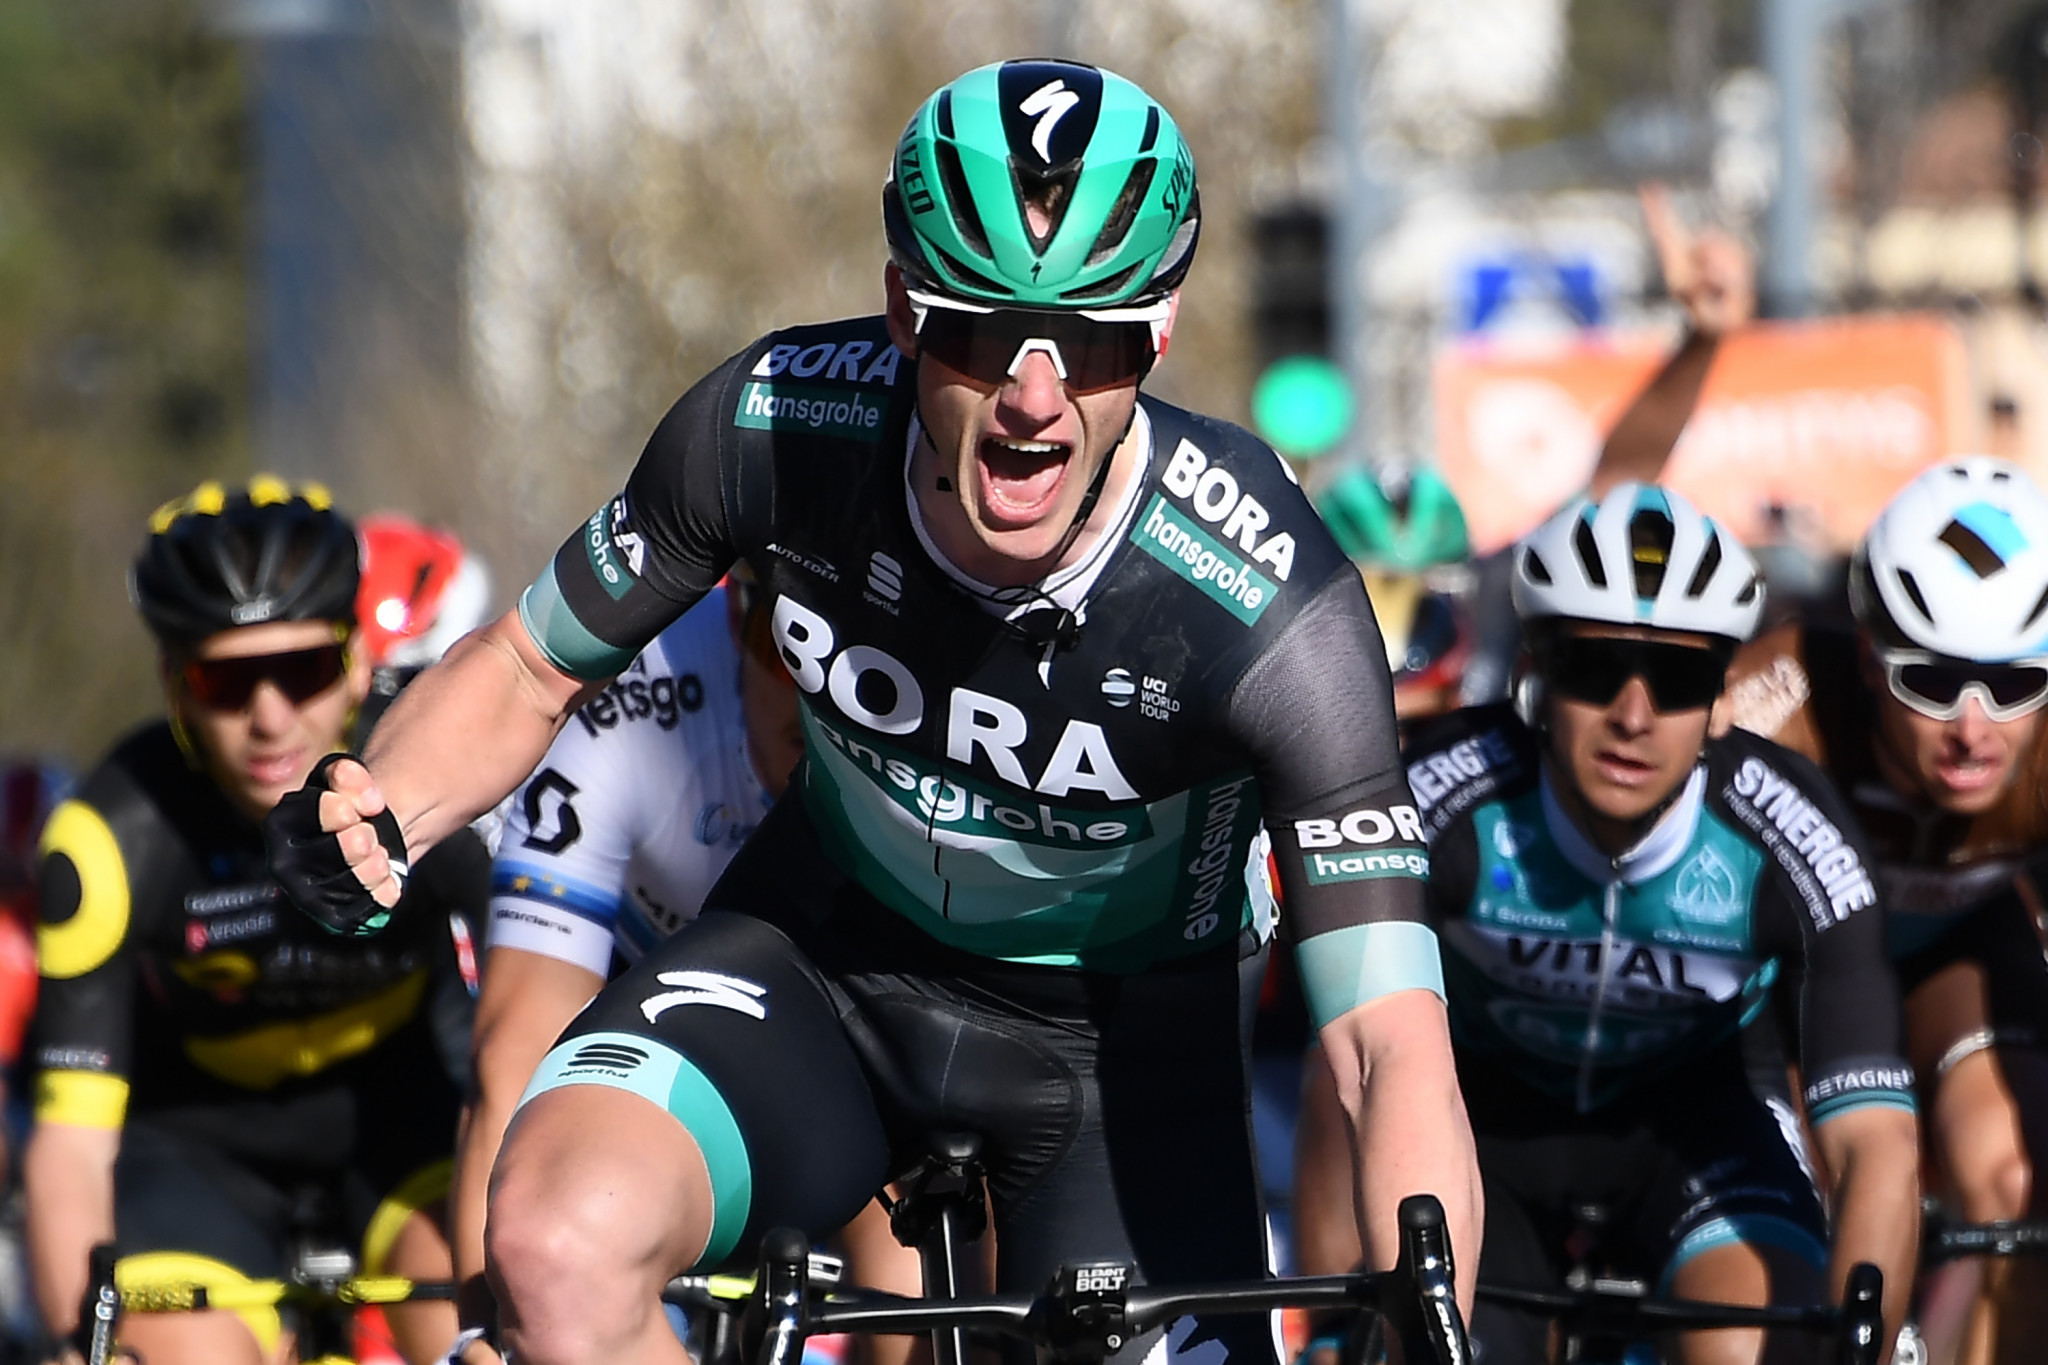 Ireland’s Sam Bennett won stage three of the Critérium du Dauphiné in a bunch gallop in Riom ©Getty Images